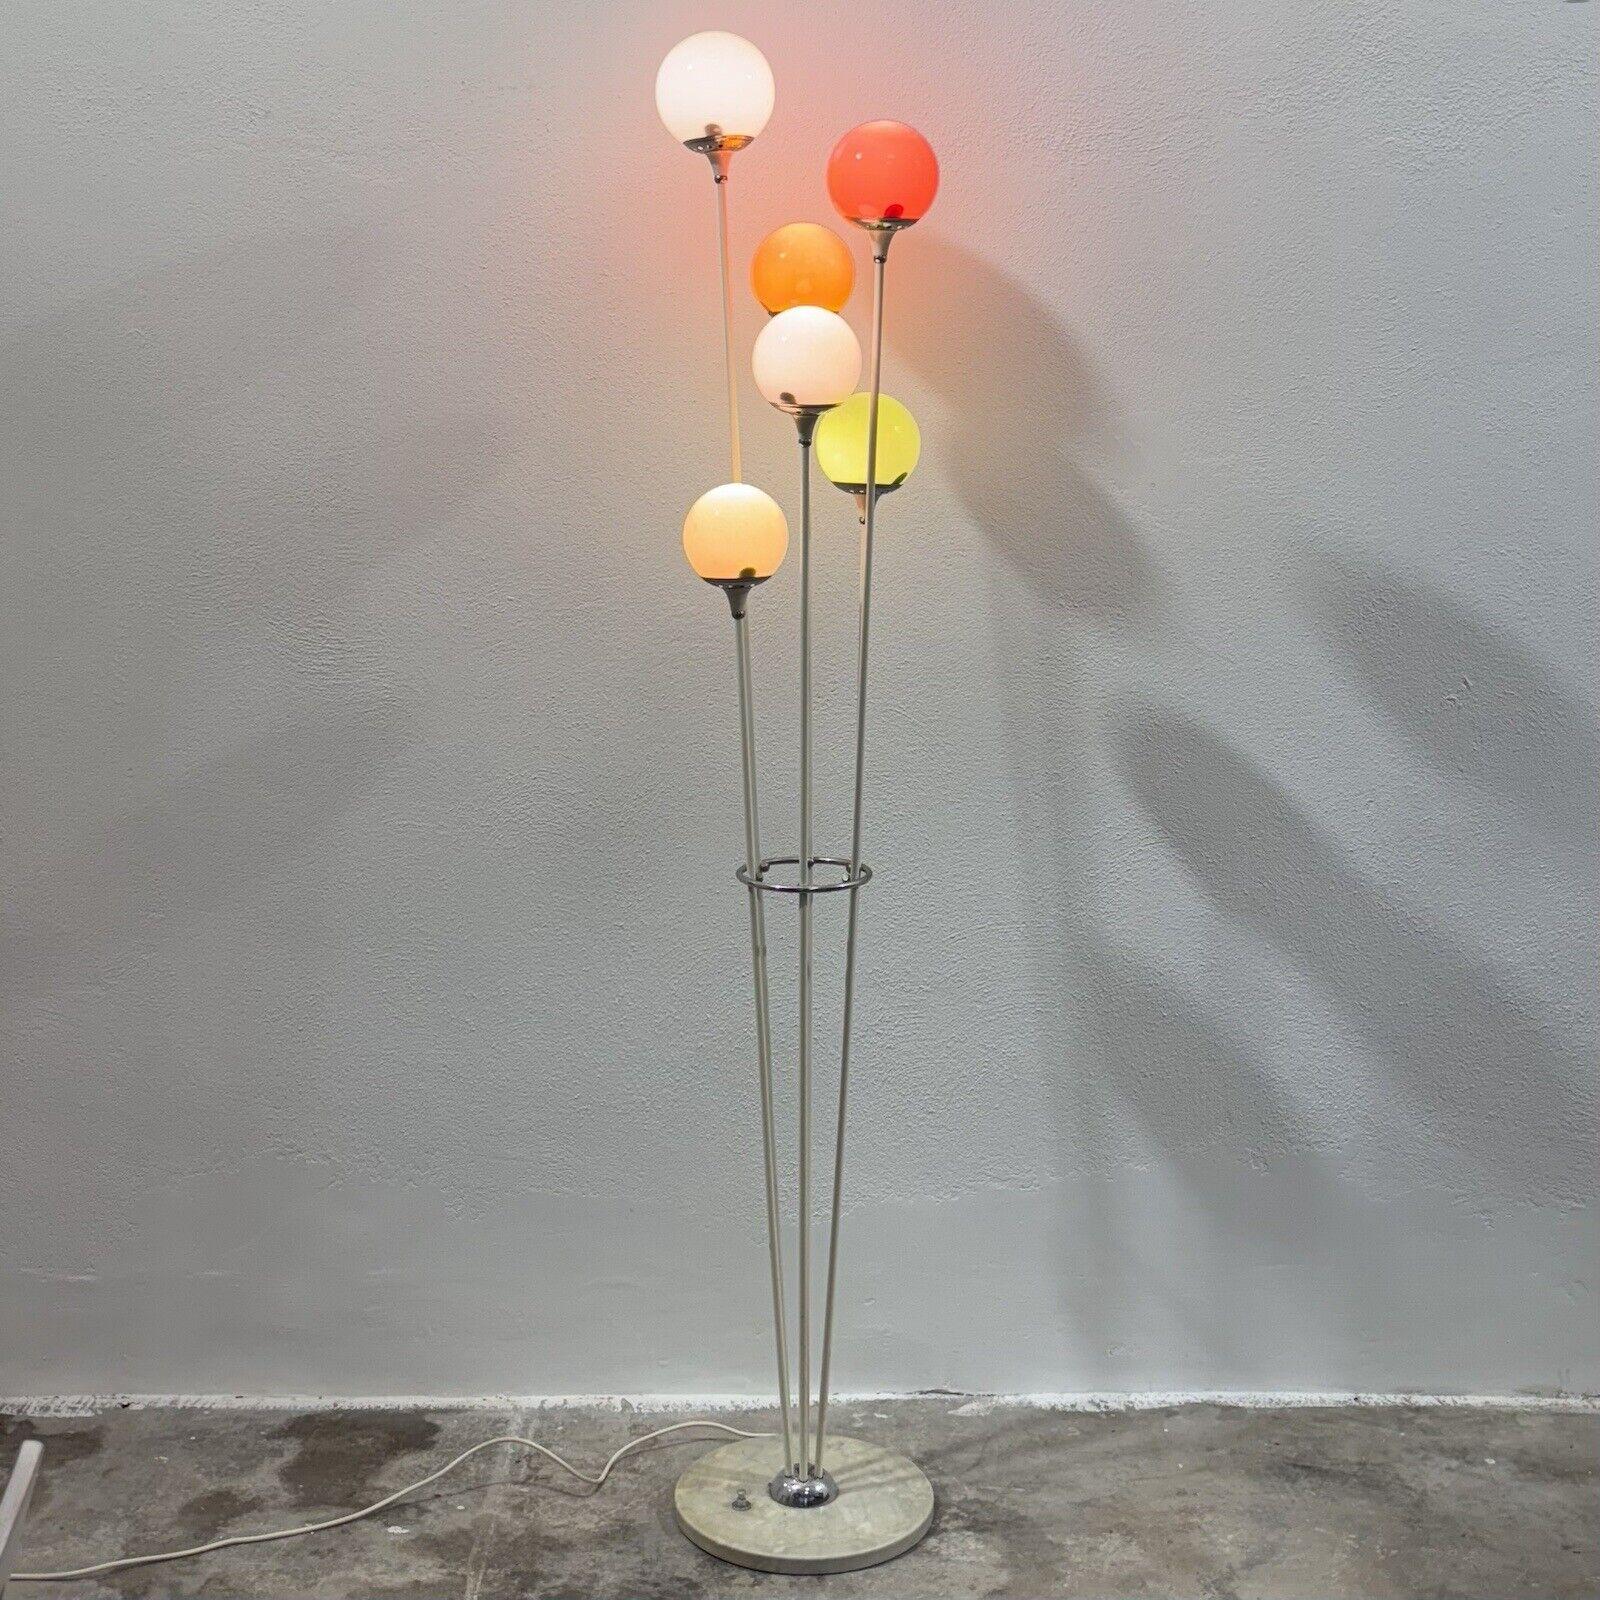 Alberello Stilnovo Floor Lamp 1960's Design Modernism Mid-century.

Metal frame , marble base, glass diffusers.

The item is in good conservative condition, there are no major cosmetic or structural defects to report, just slight and obvious signs